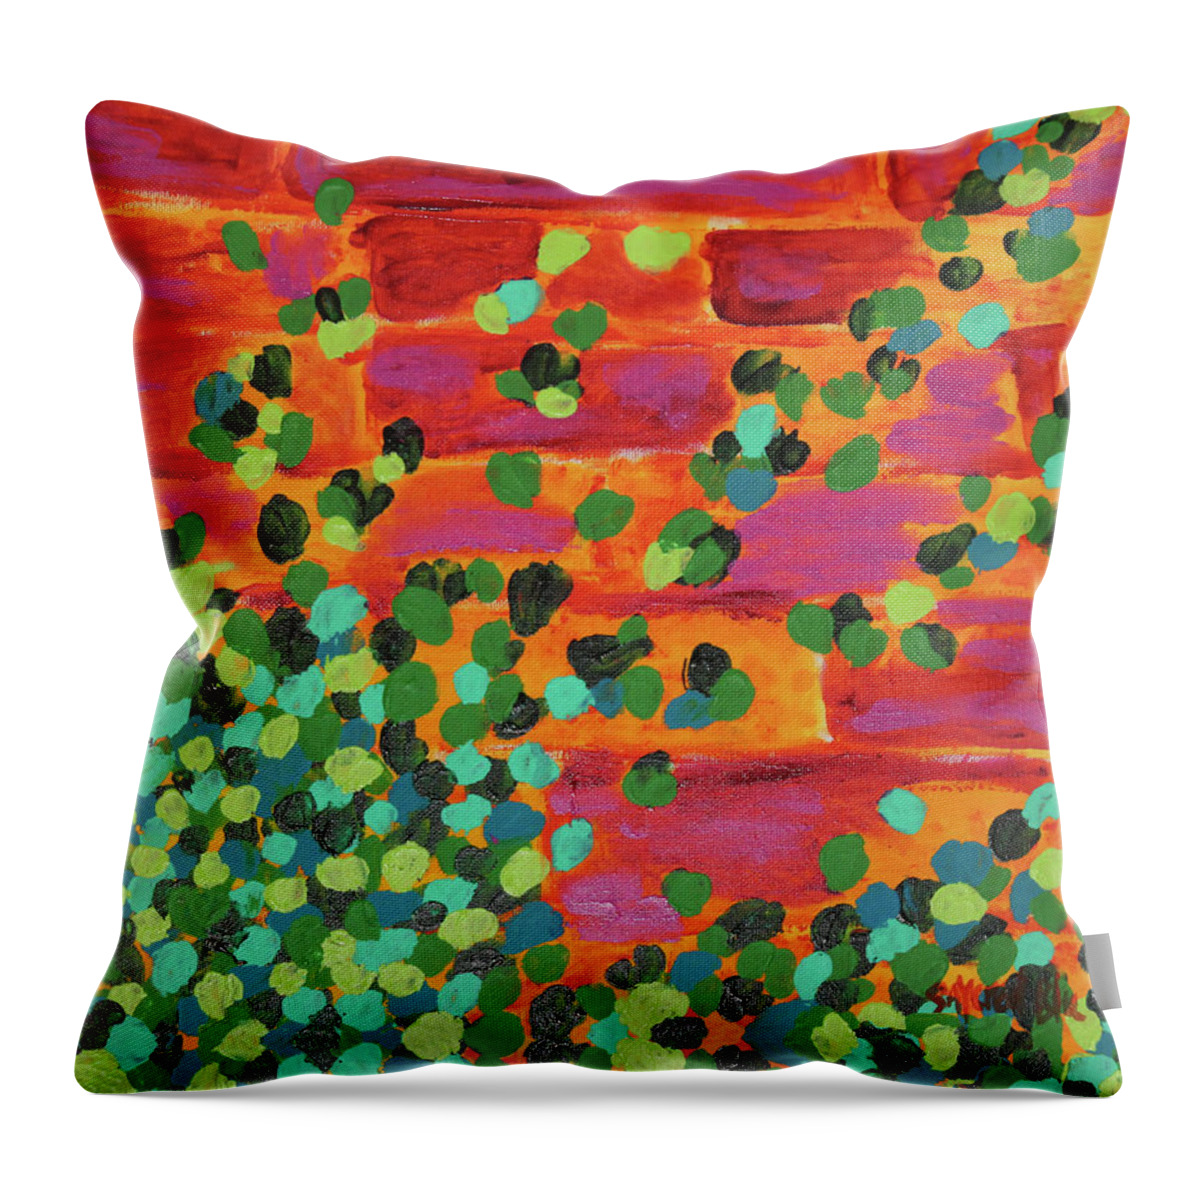 Bold Bright Colors Throw Pillow featuring the painting Climbing Ivy by Saycred Blu